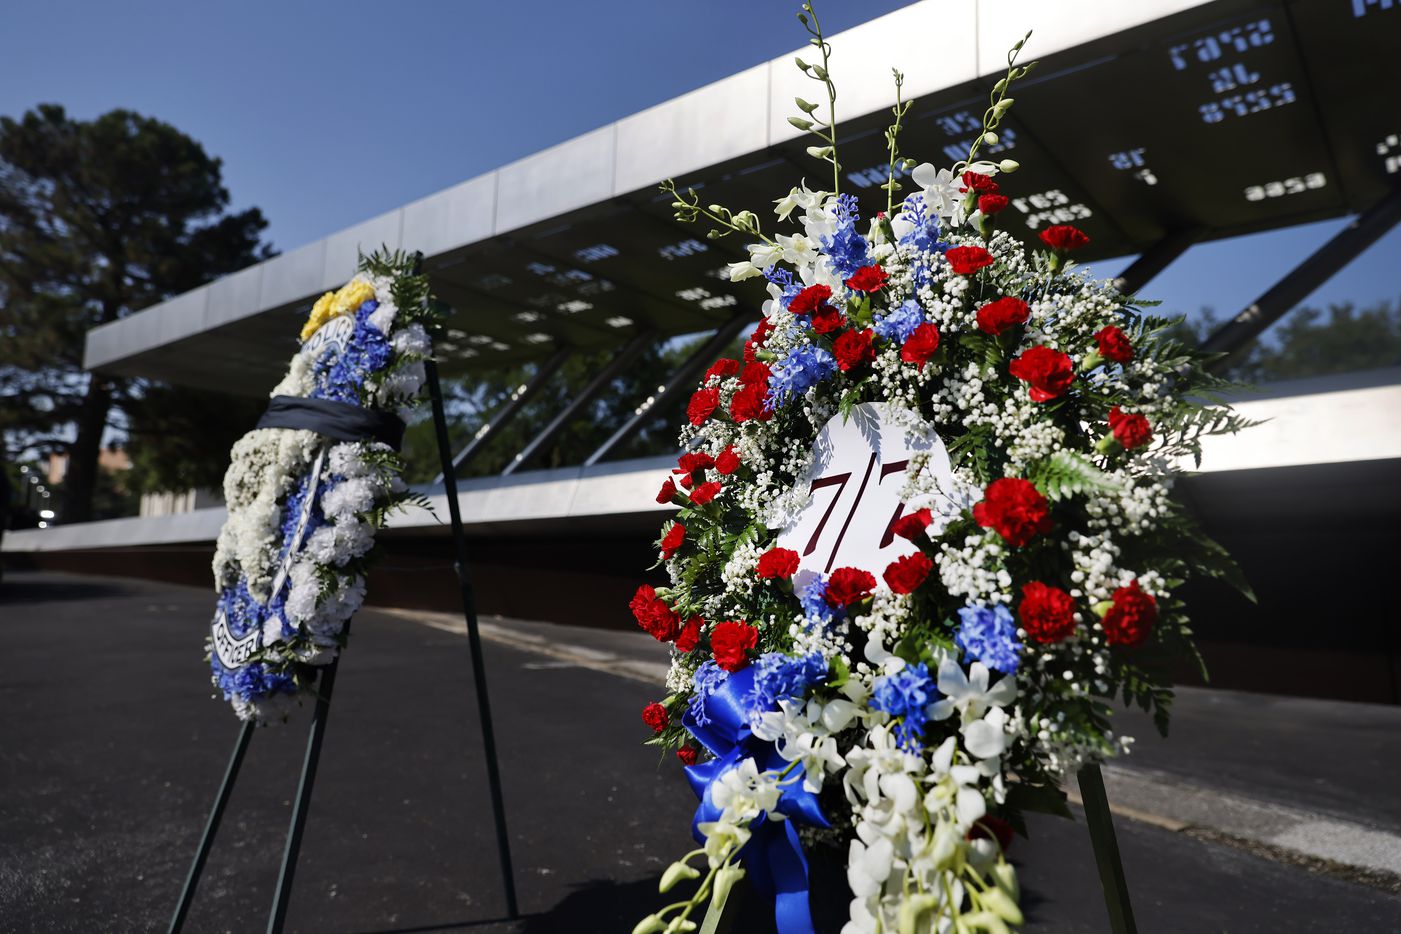 A special 7-7 wreath was placed during the 2021 Police Memorial Day at the Dallas Police Memorial in downtown Dallas, Wednesday, July 7, 2021. It was the 5th anniversary of the July 7th ambush and special recognition was given to those officers who were killed. (Tom Fox/The Dallas Morning News)